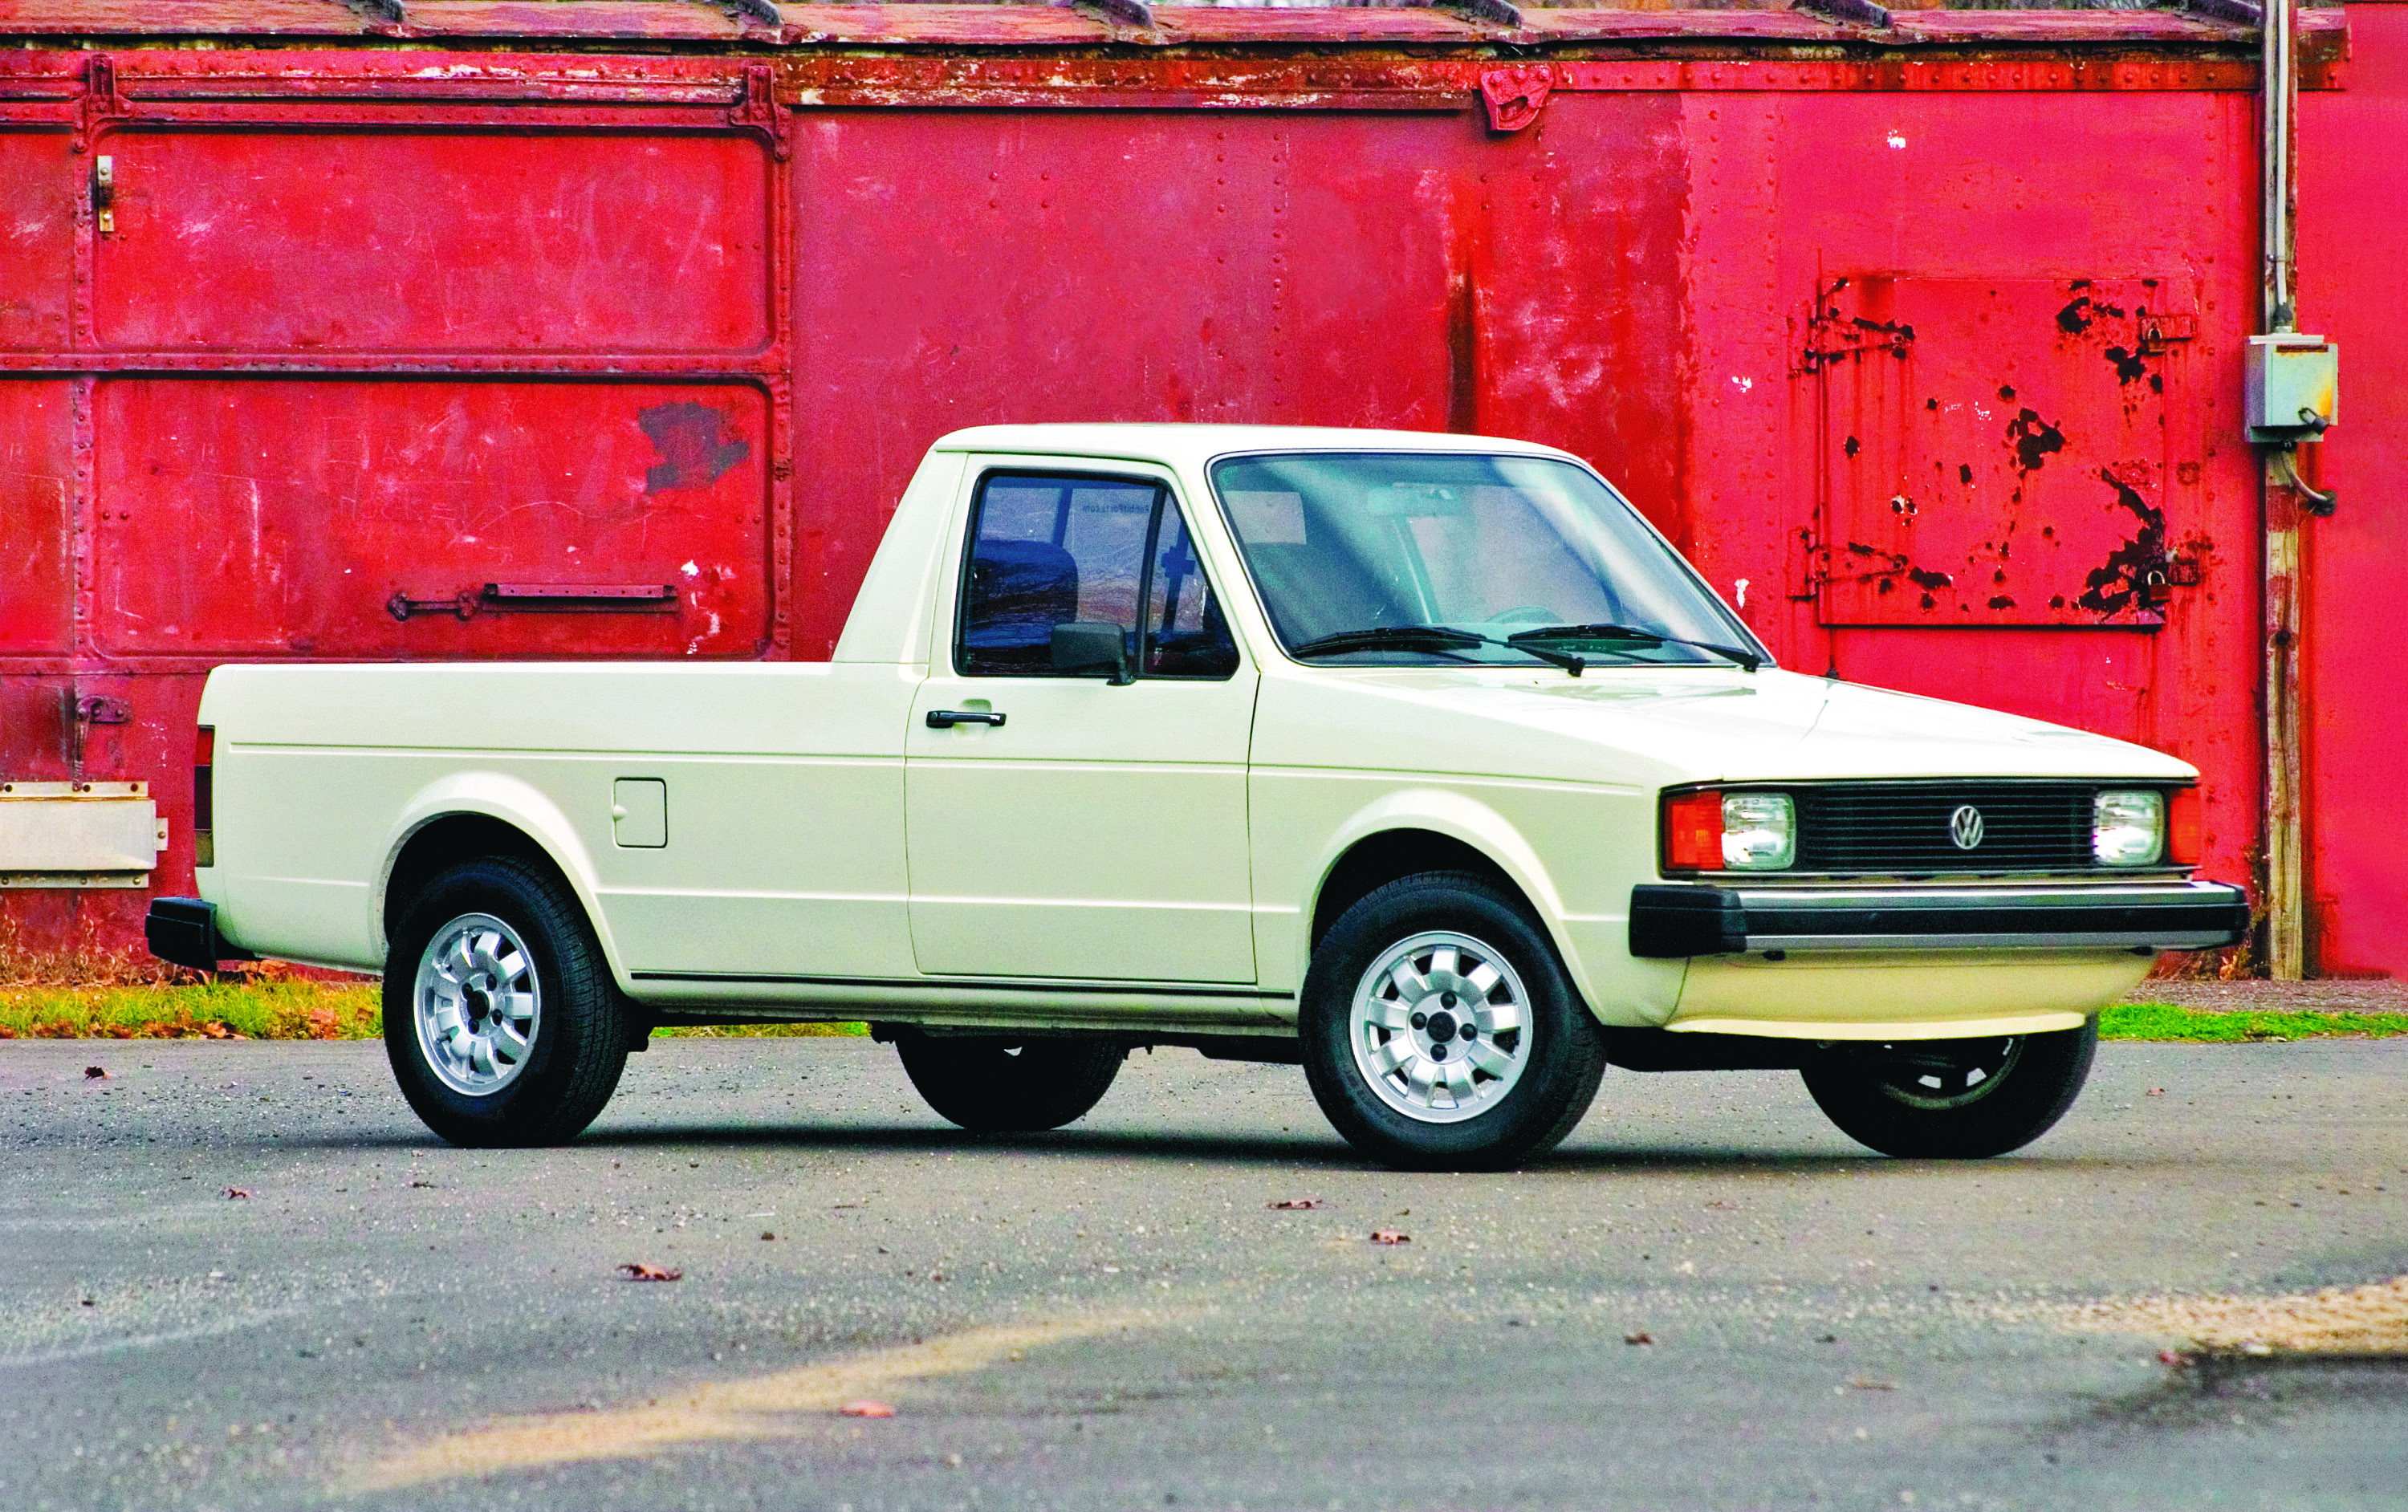 The 1980-1983 Volkswagen Pickup Is A Practical Classic